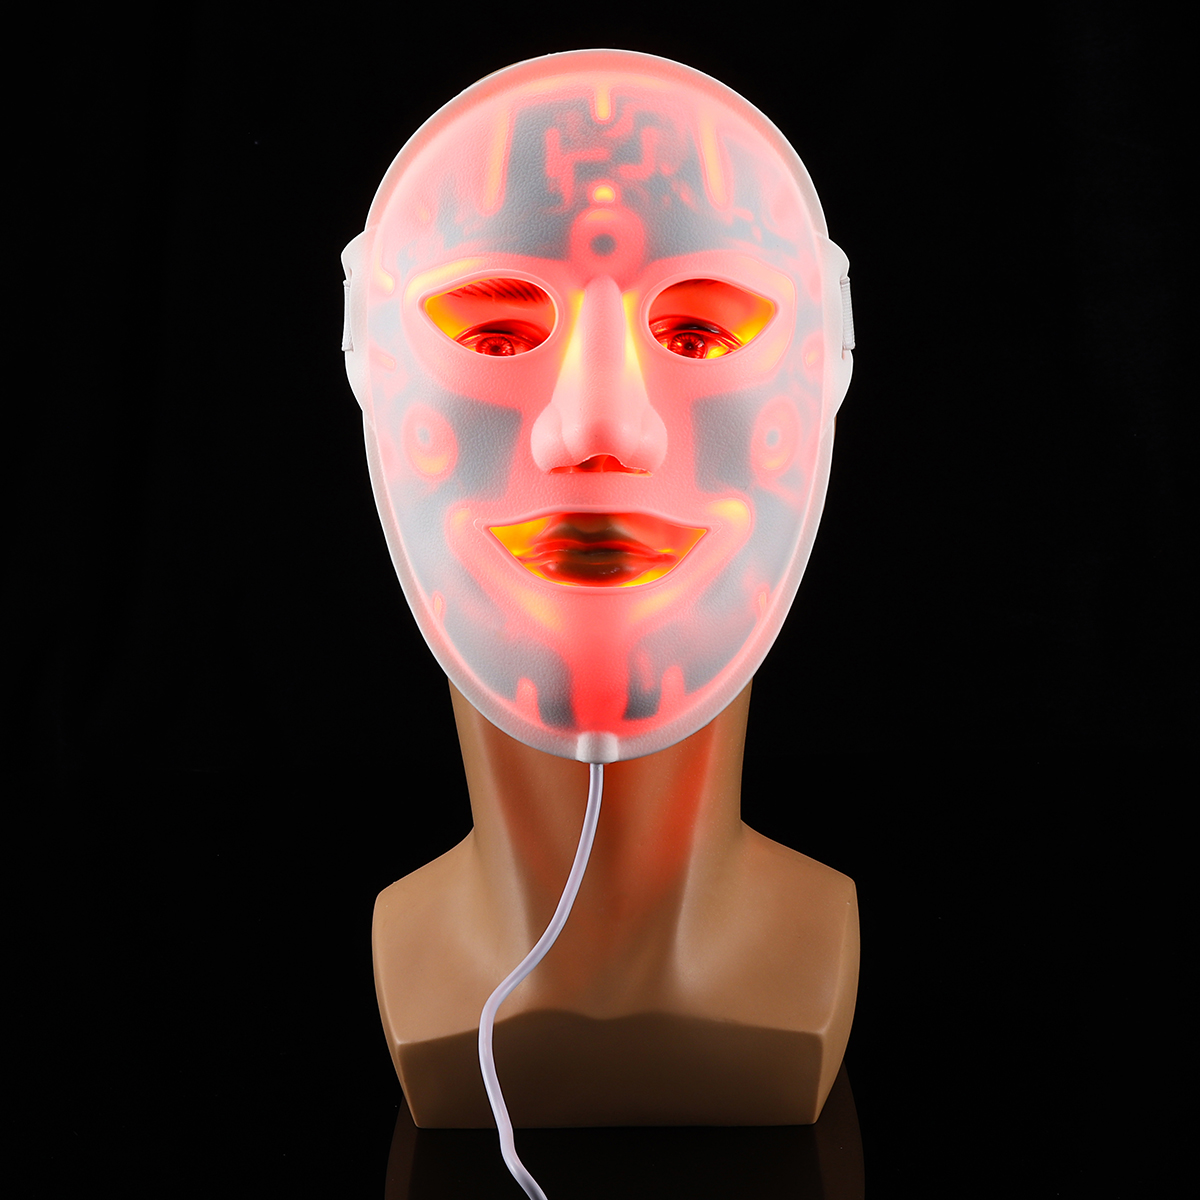 LED-Photon-Therapy-Facial-Mask-3-Colors-Vibration-Skin-Massager-Beauty-Face-Tool-1940393-14